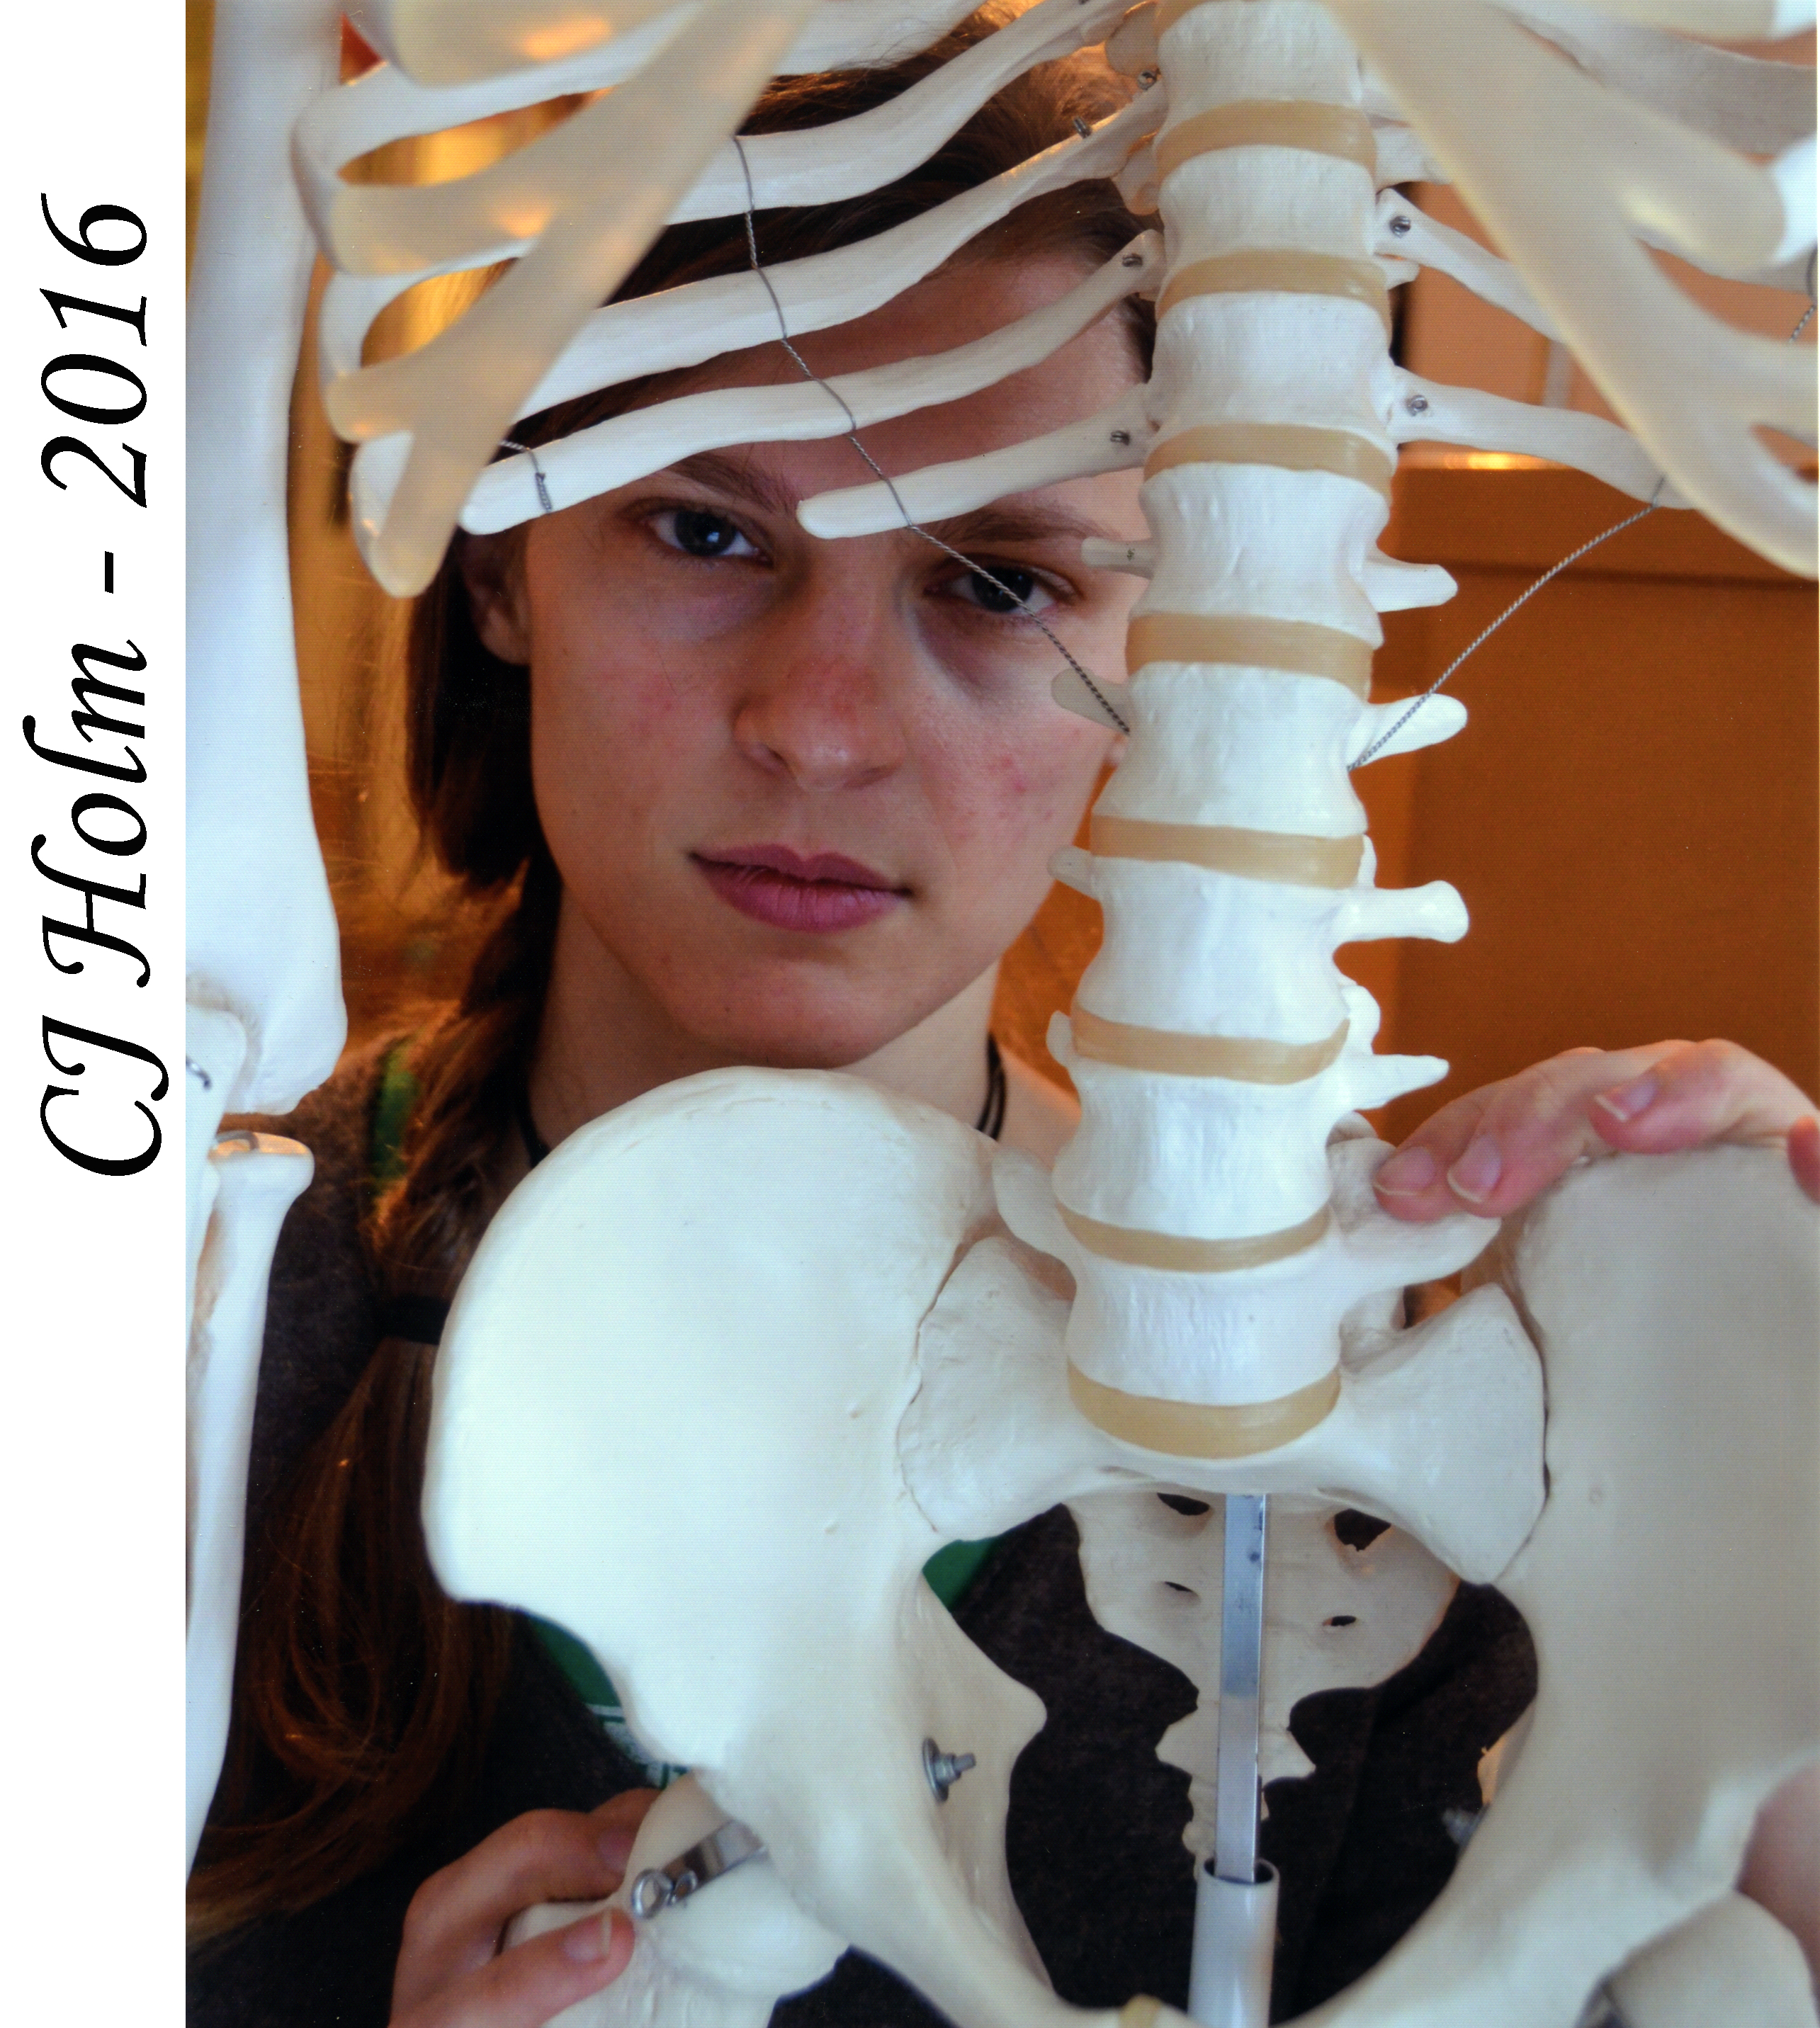 She is looking at the camera through the midsection of a skeleton